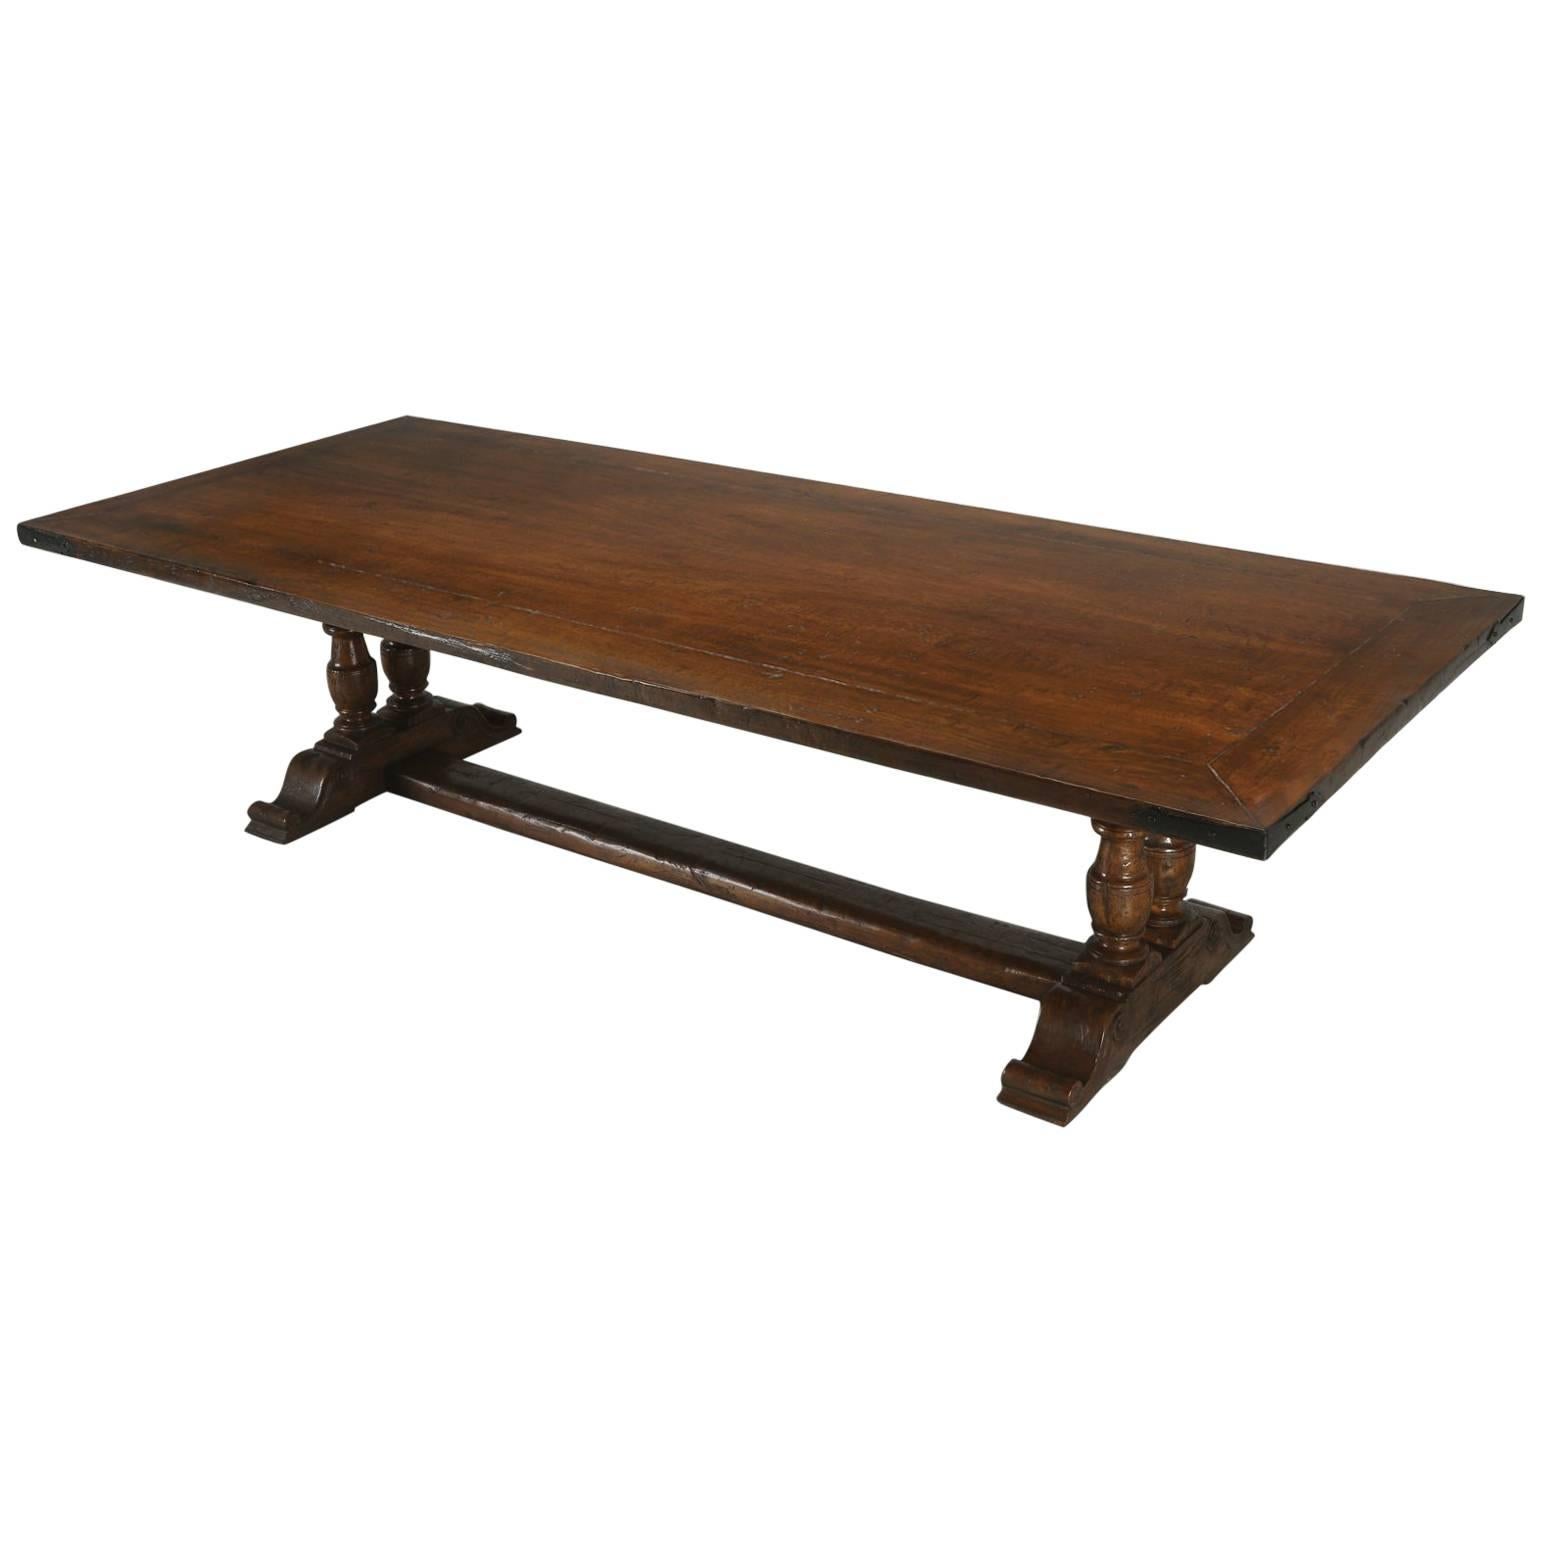 French Country Dining Table Made from Reclaimed Walnut in Chicago by Old Plank For Sale